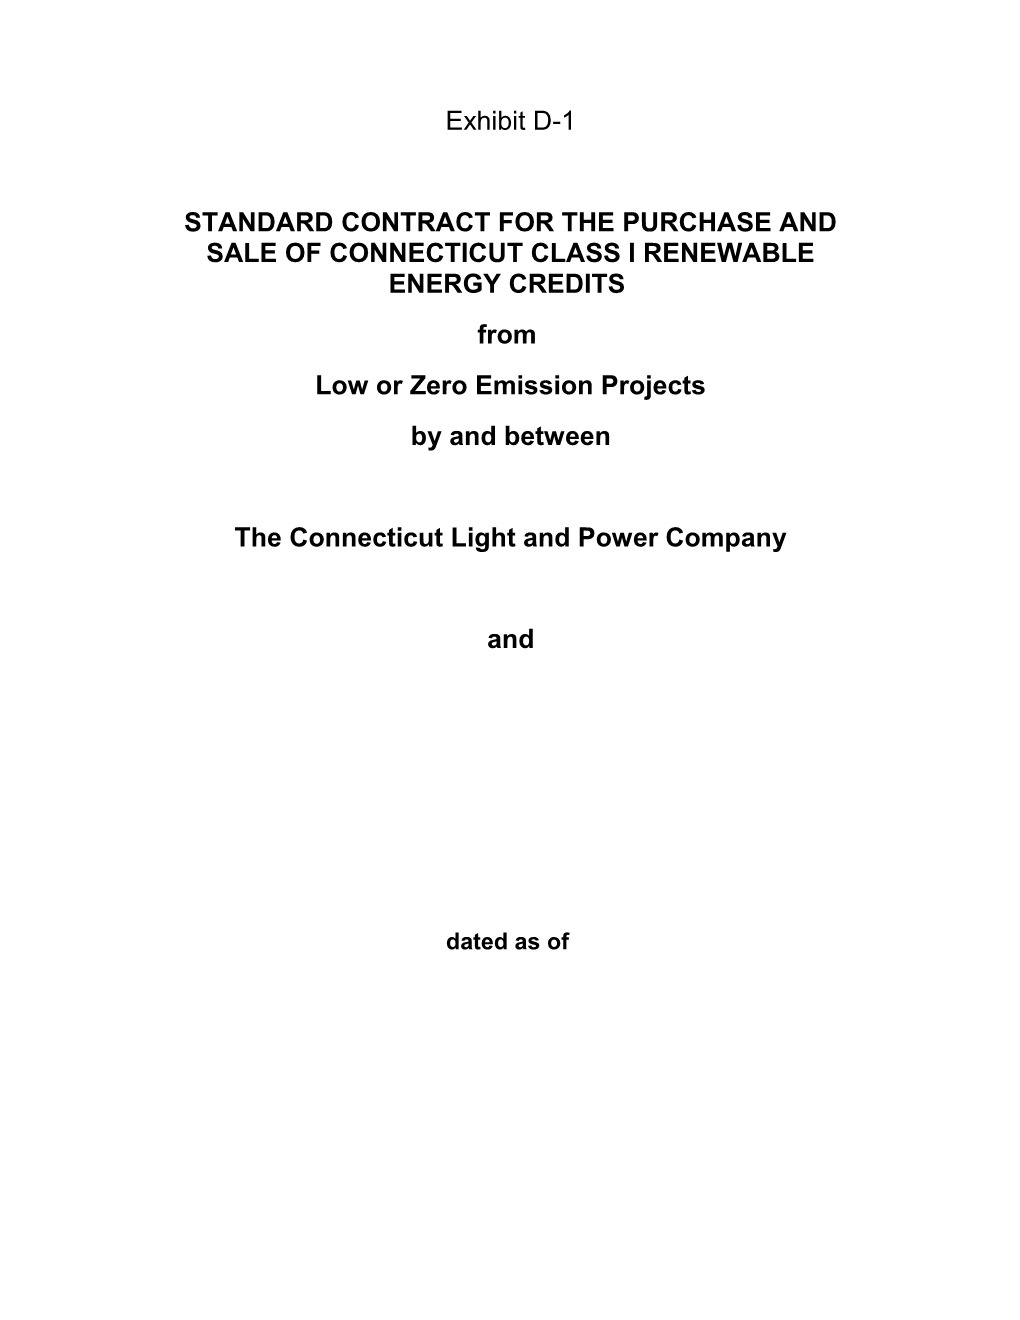 Standard Contractfor the Purchase and Sale of Connecticut Class I Renewable Energy Credits